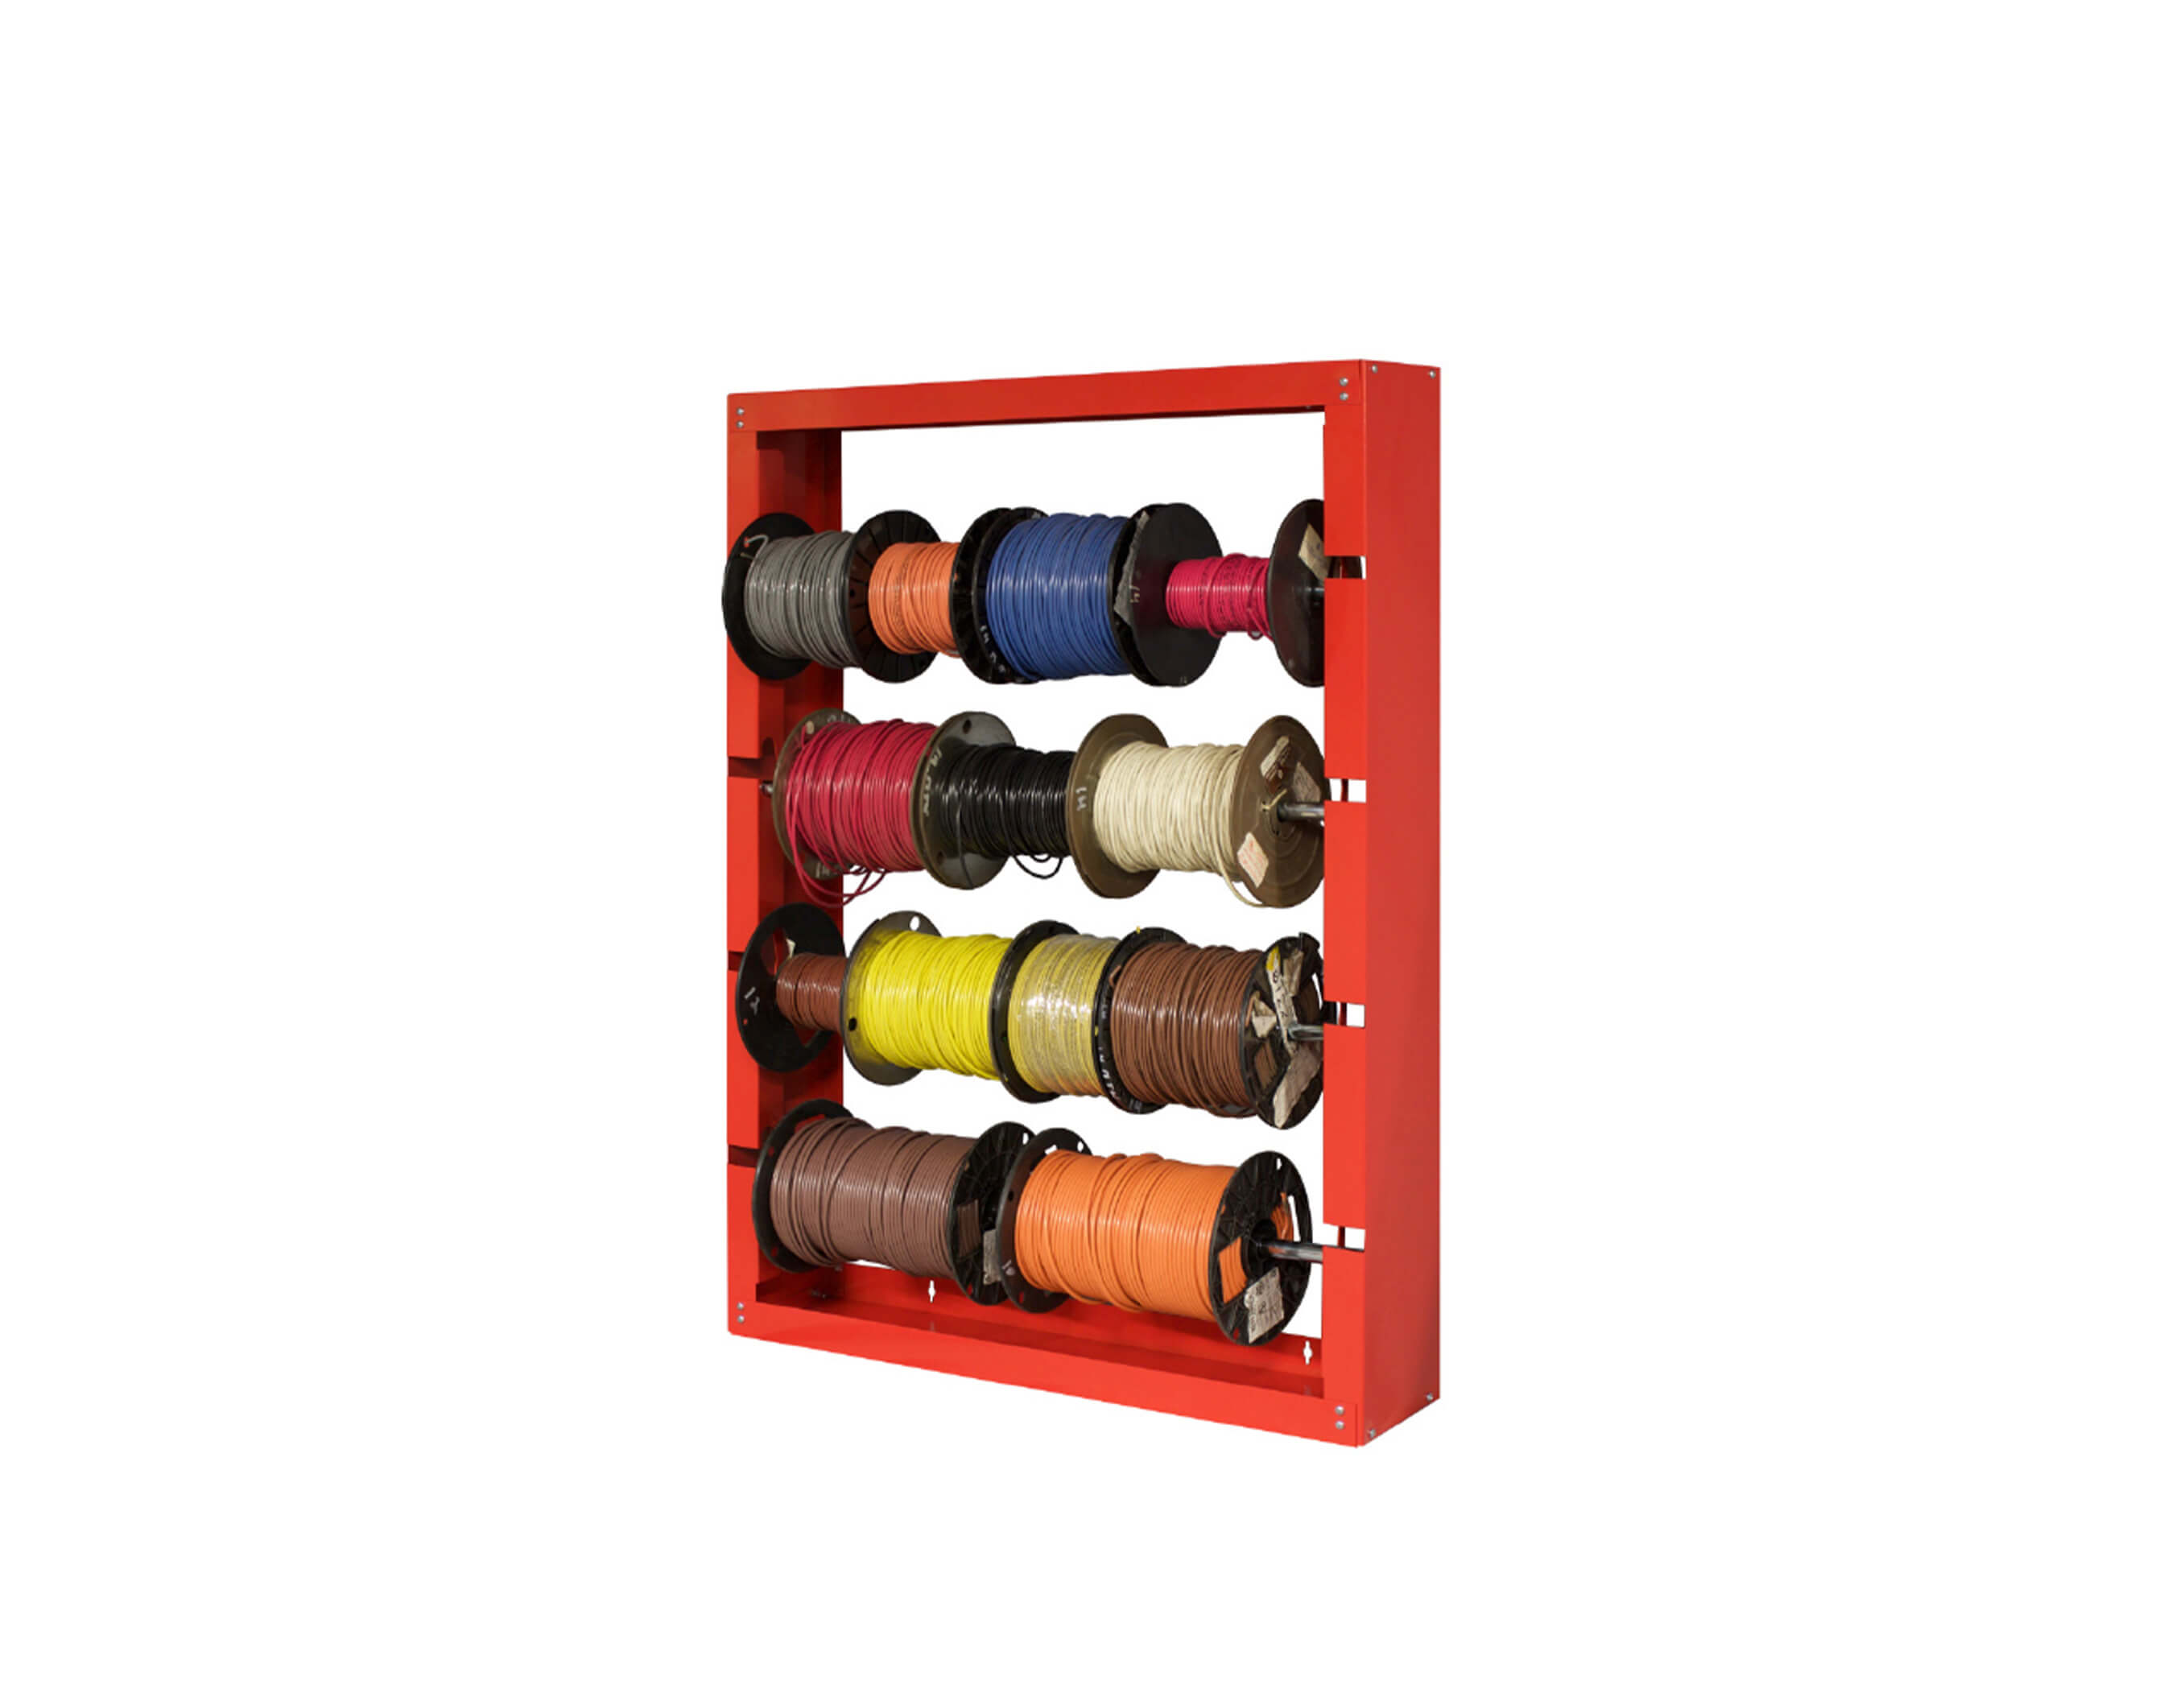 DOMESTIC WIRE RACK 4 ROLL/RED (0966810102)